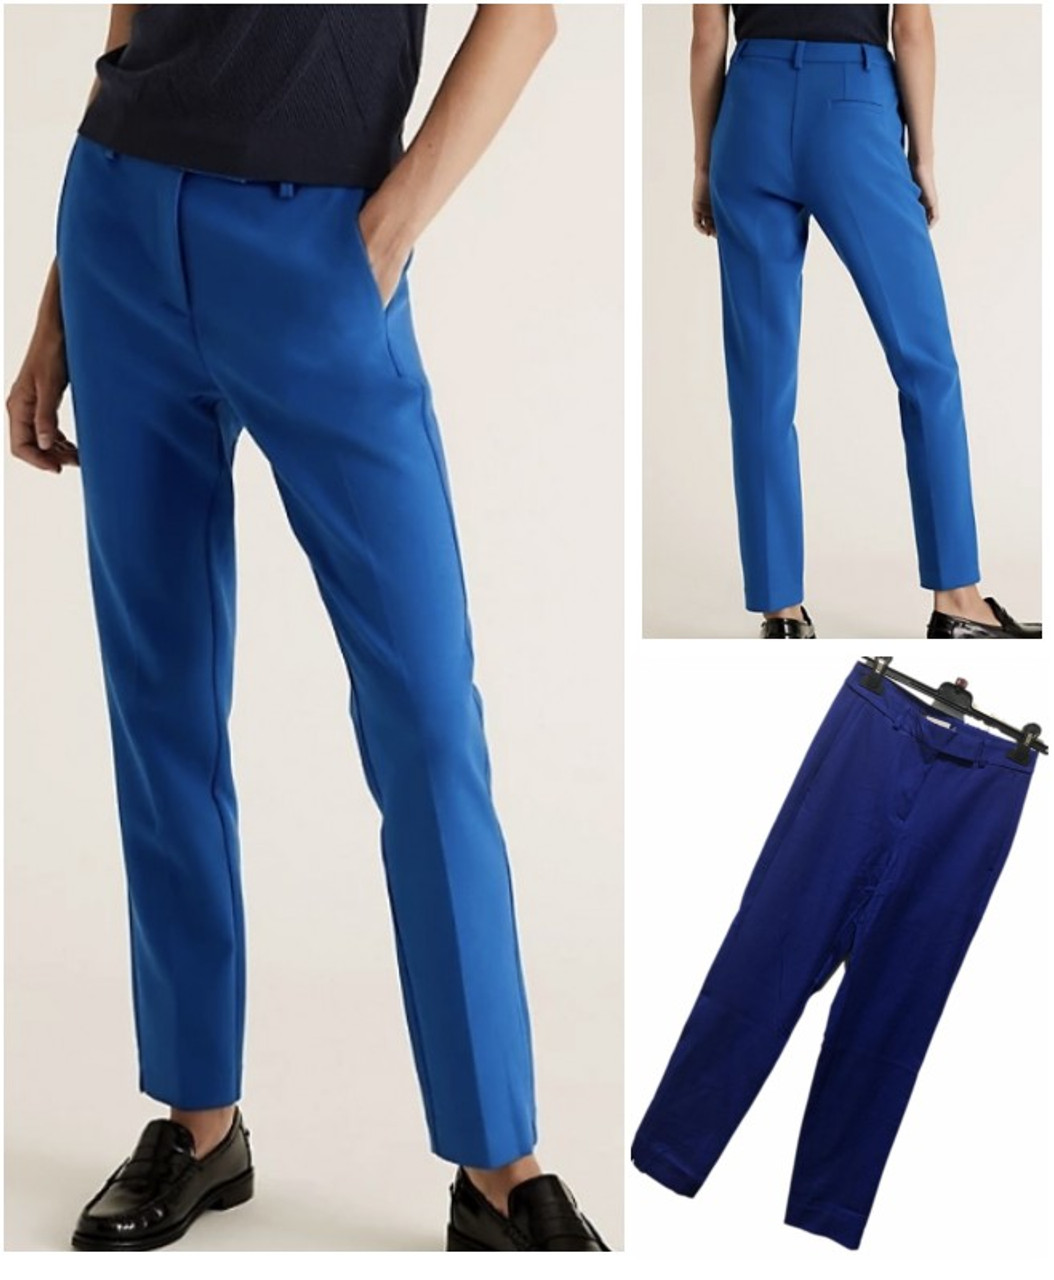 Buy Friends Like These Pastel Blue Tailored Ankle Grazer Trousers